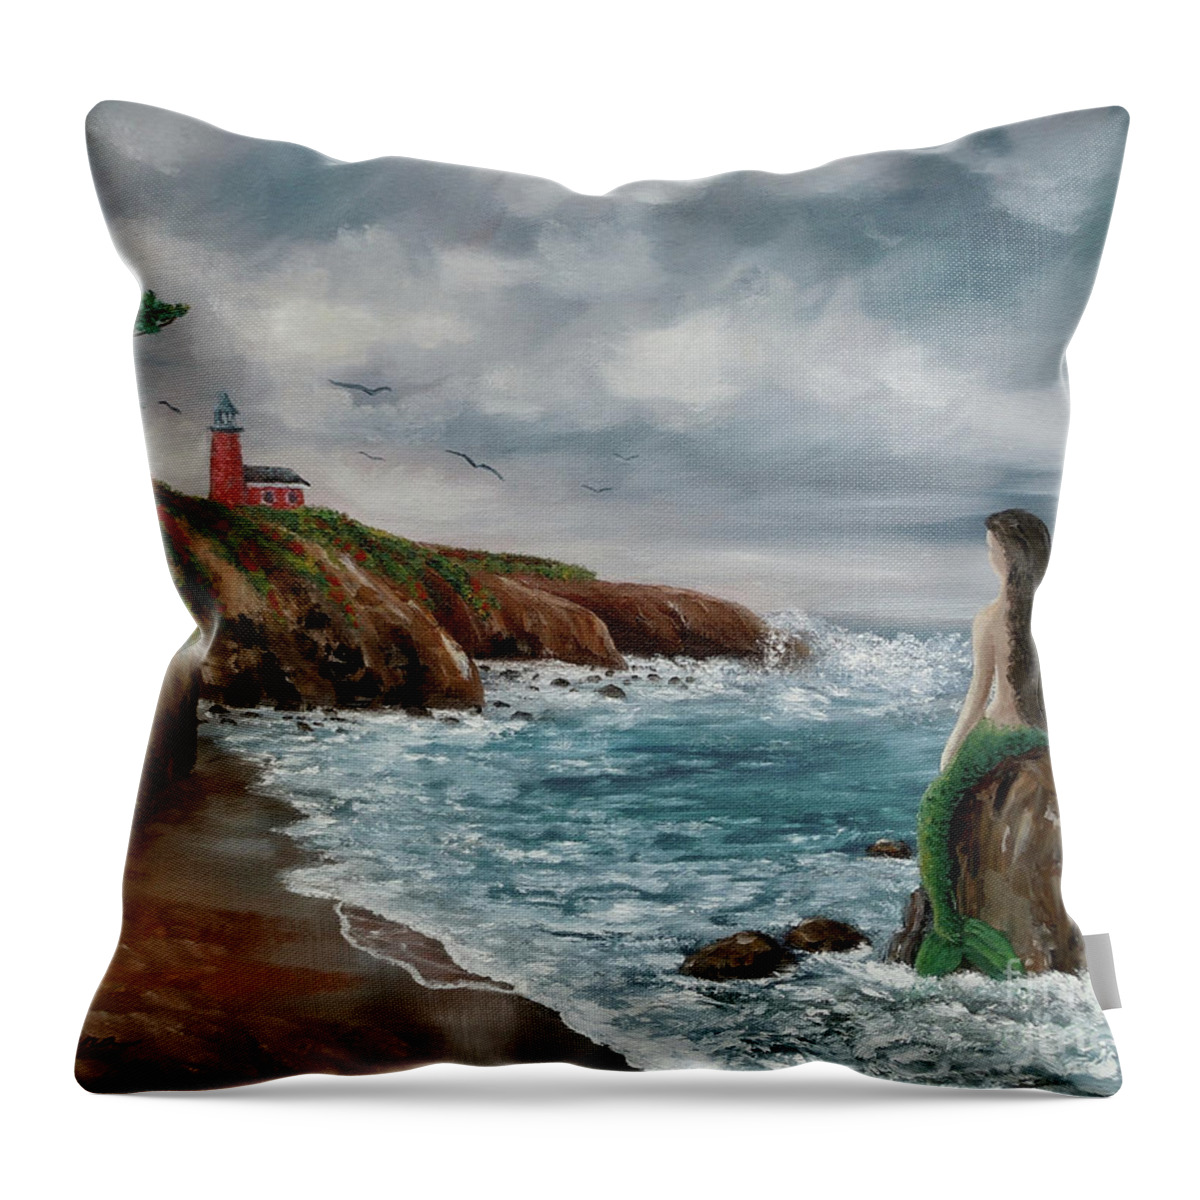 Seascape Throw Pillow featuring the painting Mermaid at Santa Cruz by Laura Iverson